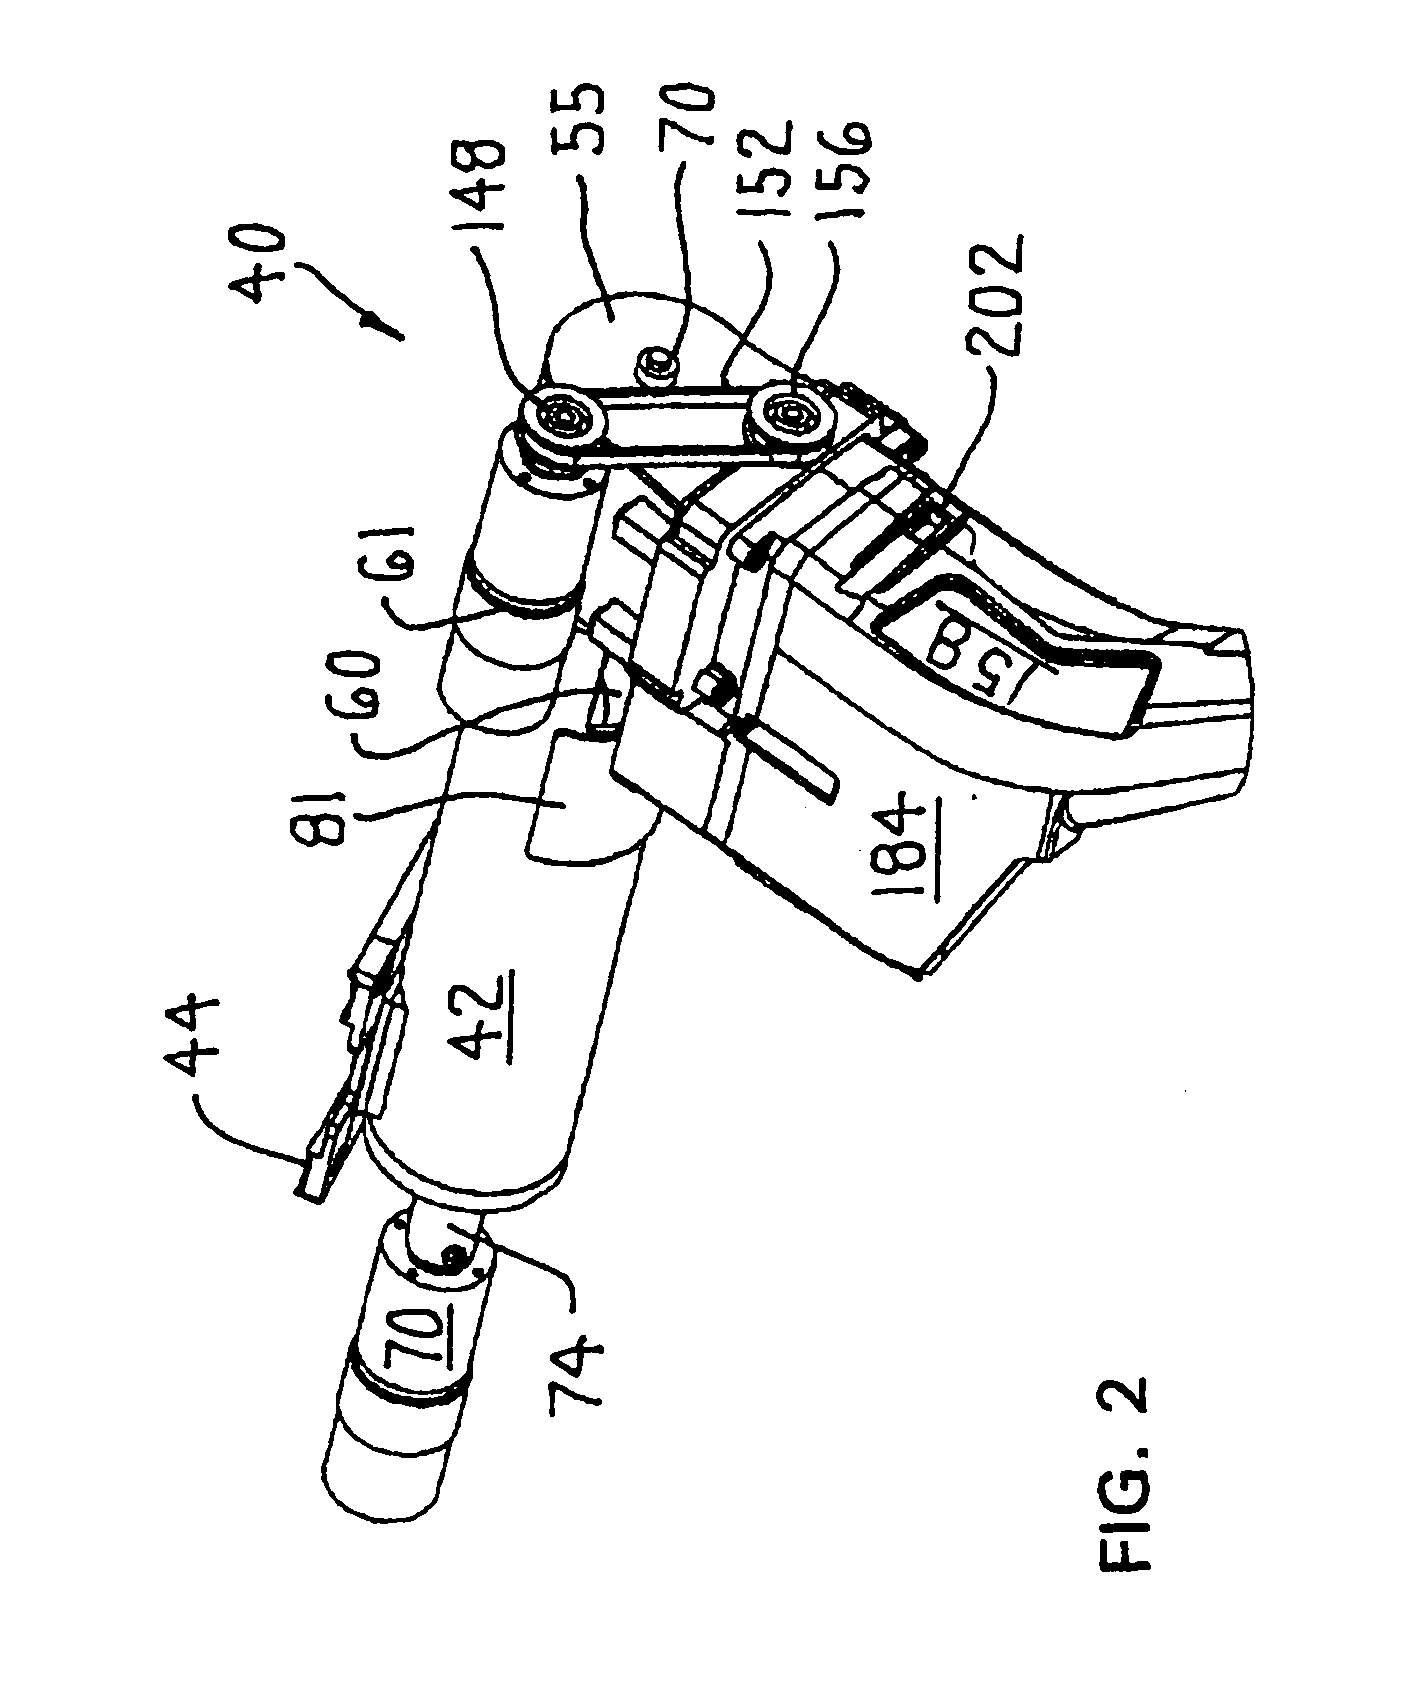 Beverage and ice dispenser capable of selectively dispensing cubed or crushed ice